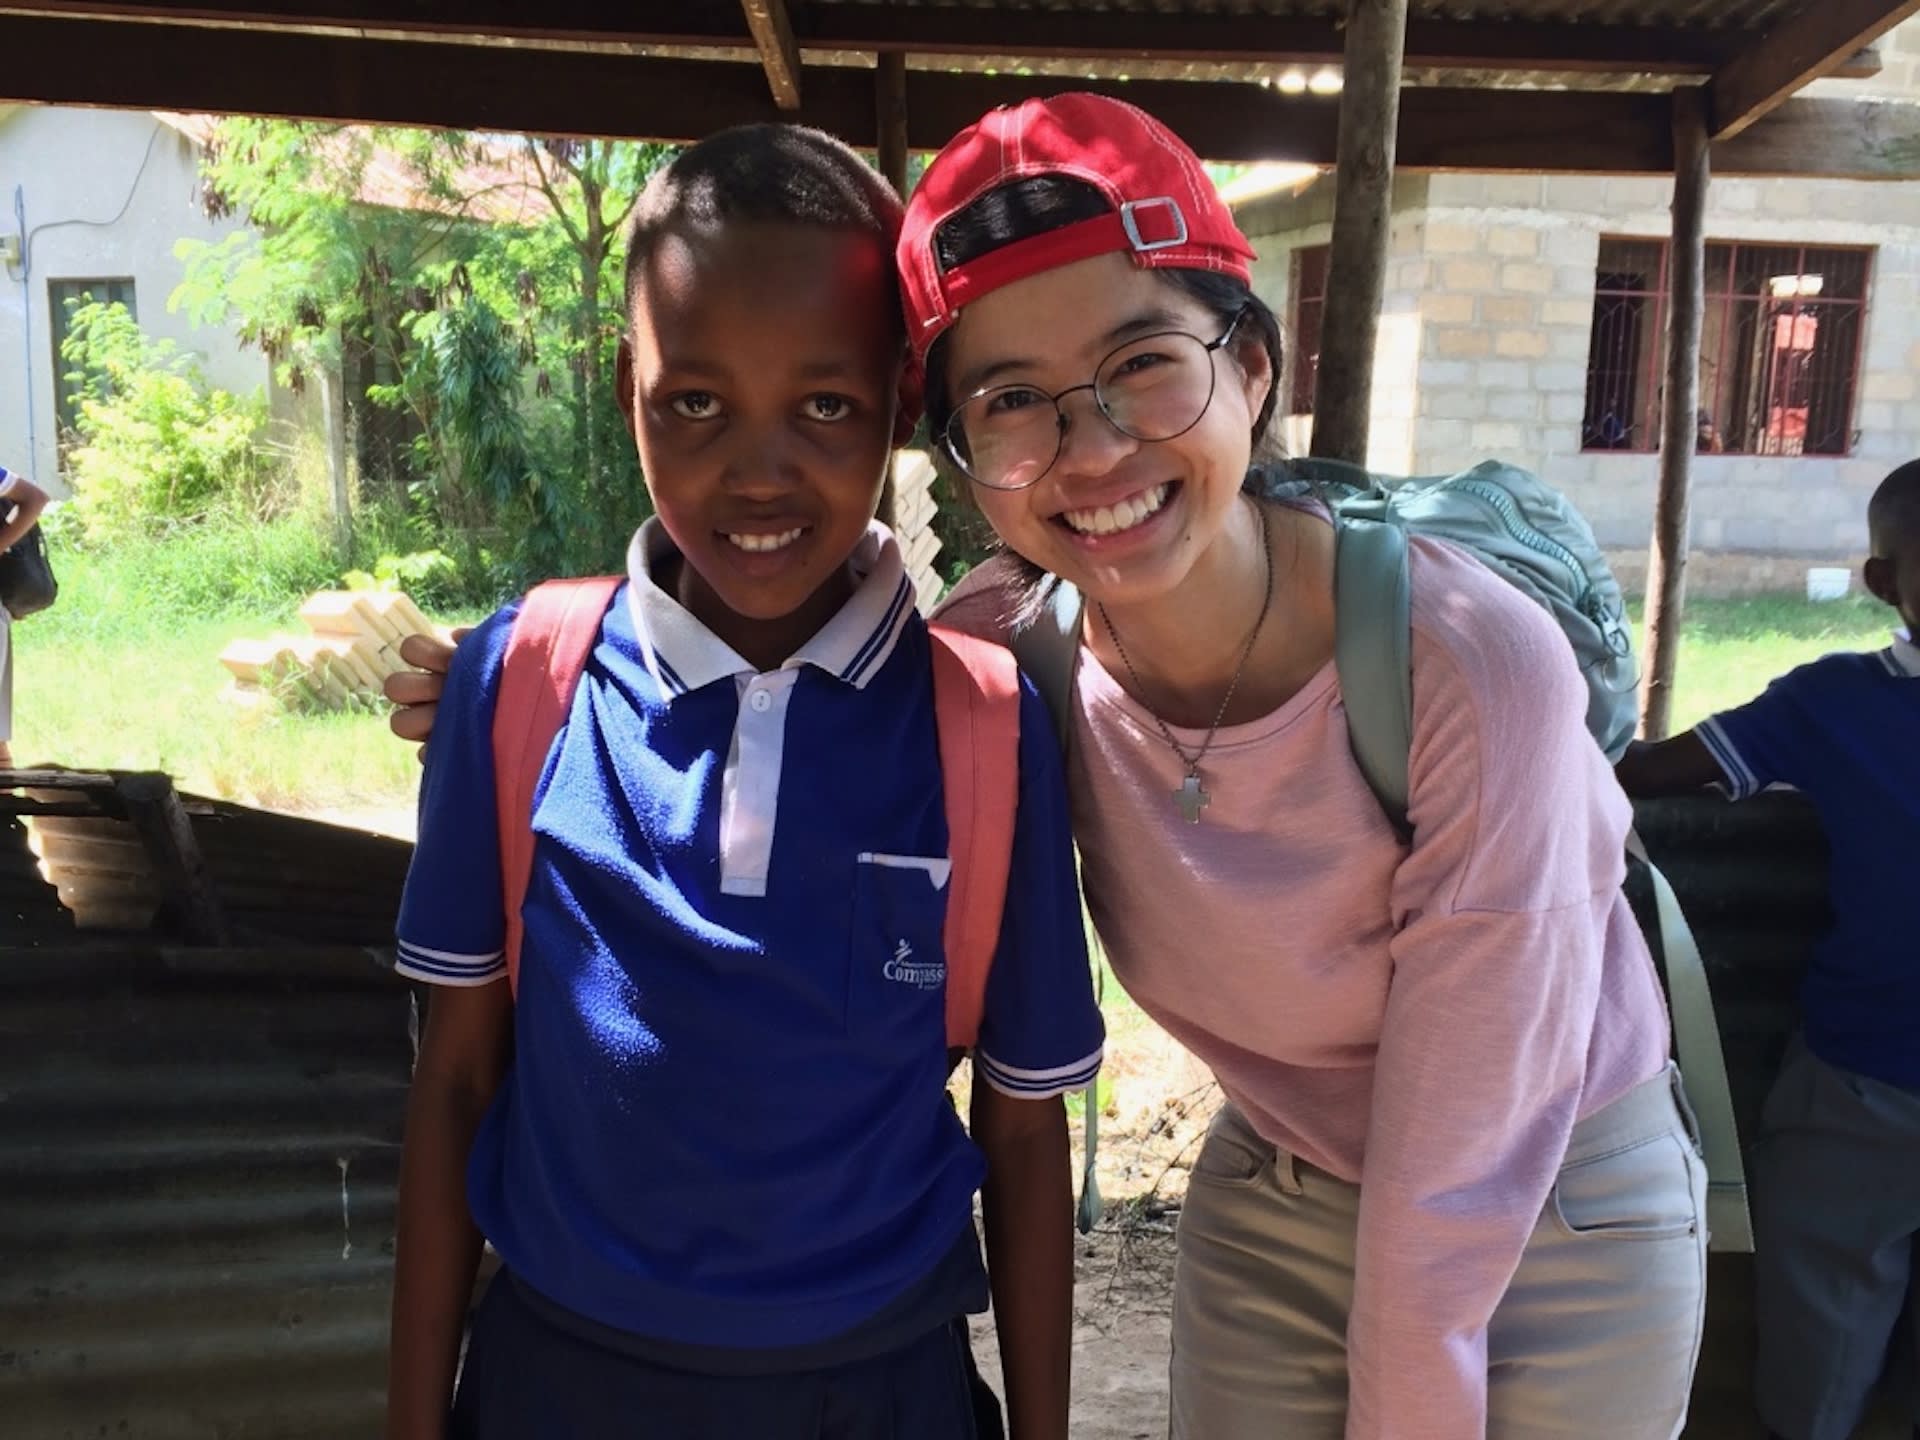 Alyssa with her sponsored child, Happyness, in Tanzania.